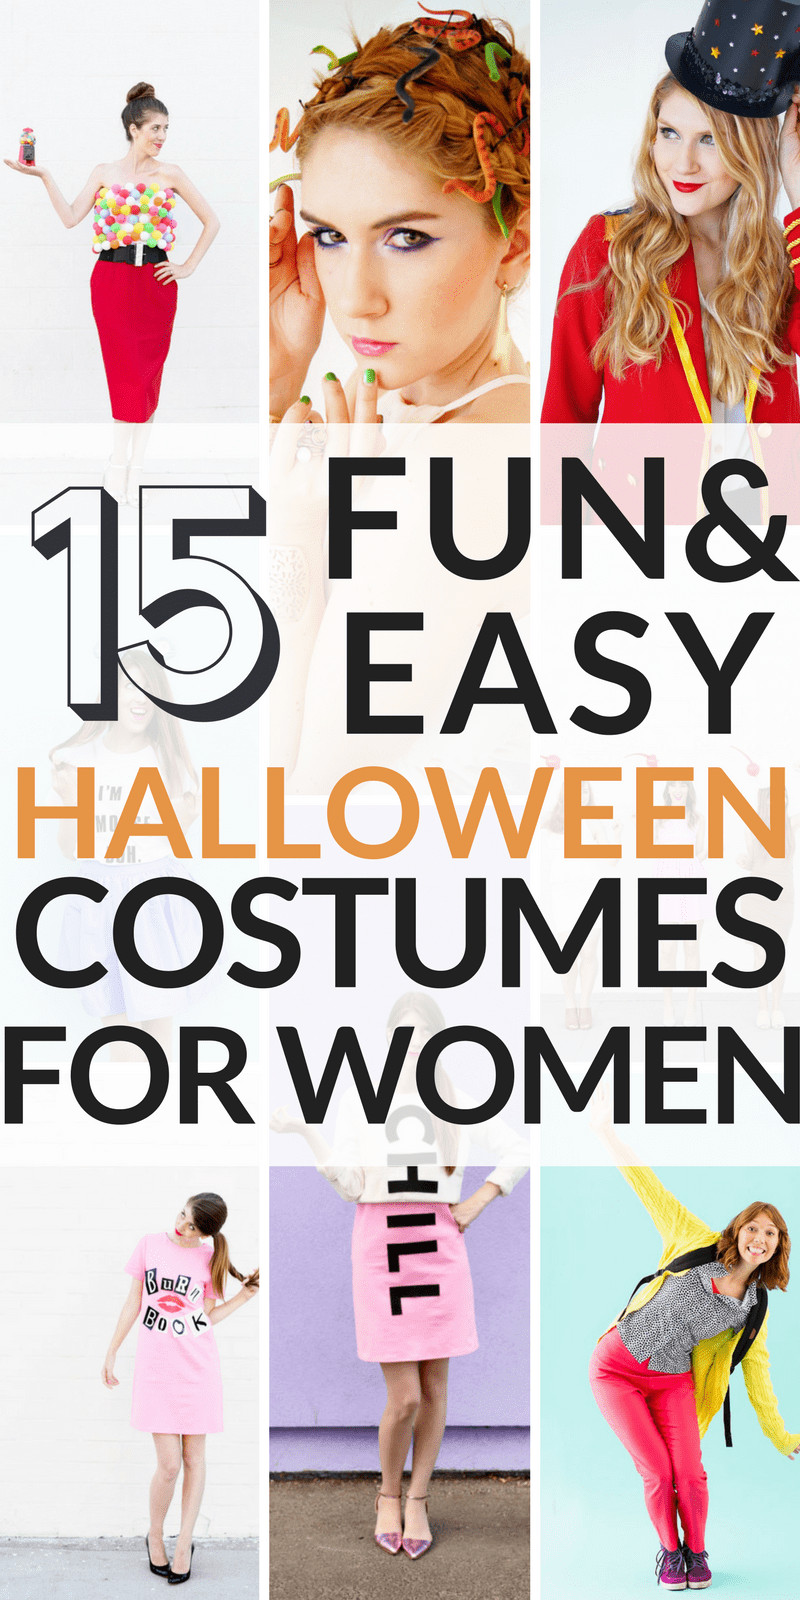 Easy DIY Couple Costumes
 15 Cheap and Easy DIY Halloween Costumes for Women